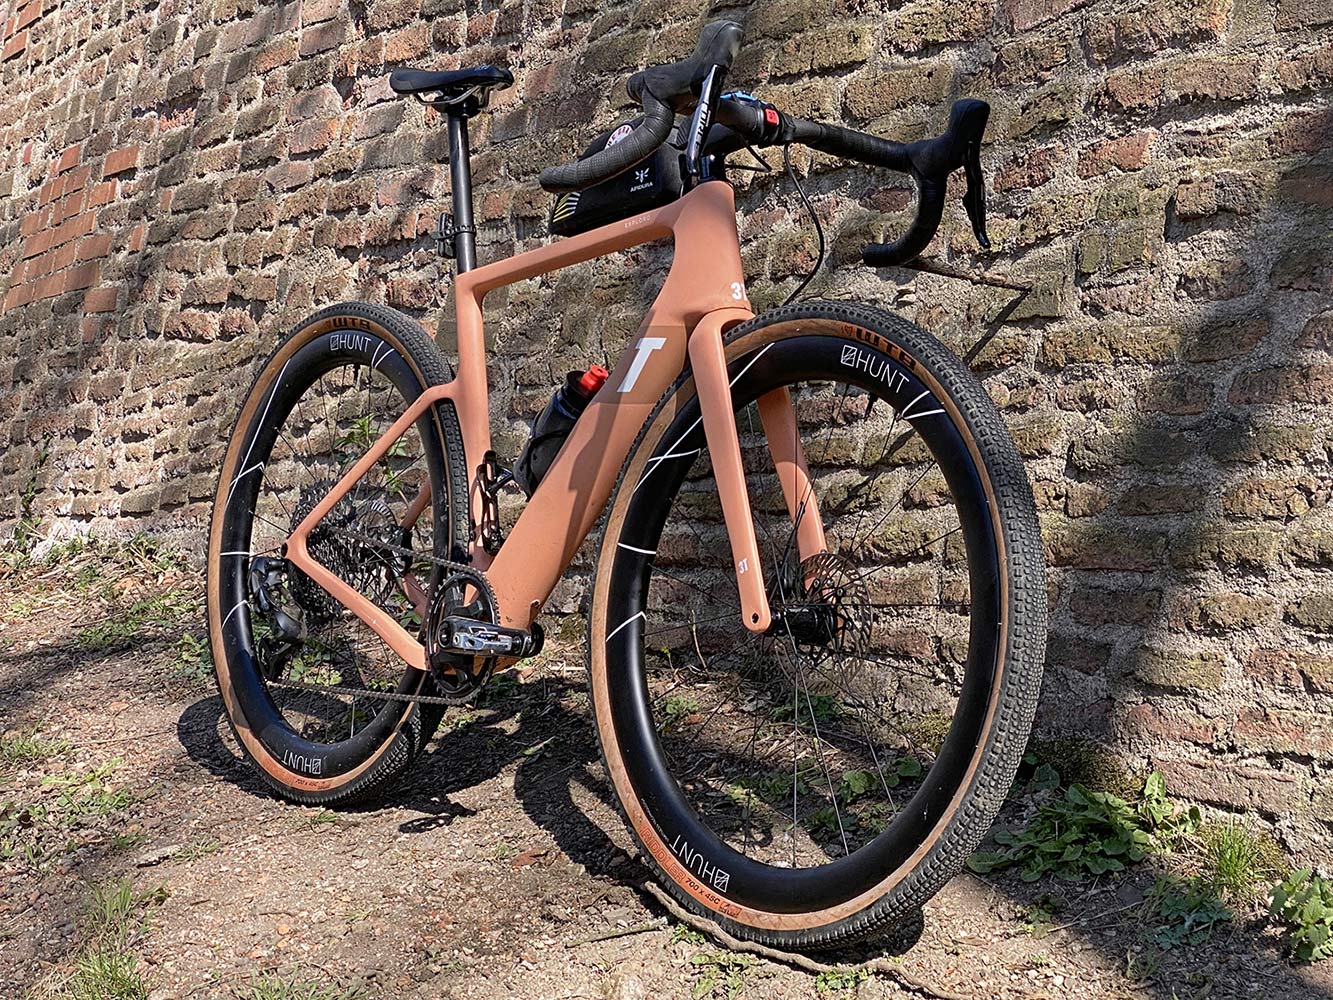 2022 3T Exploro Ultra carbon adventure gravel bike first rides review, angled